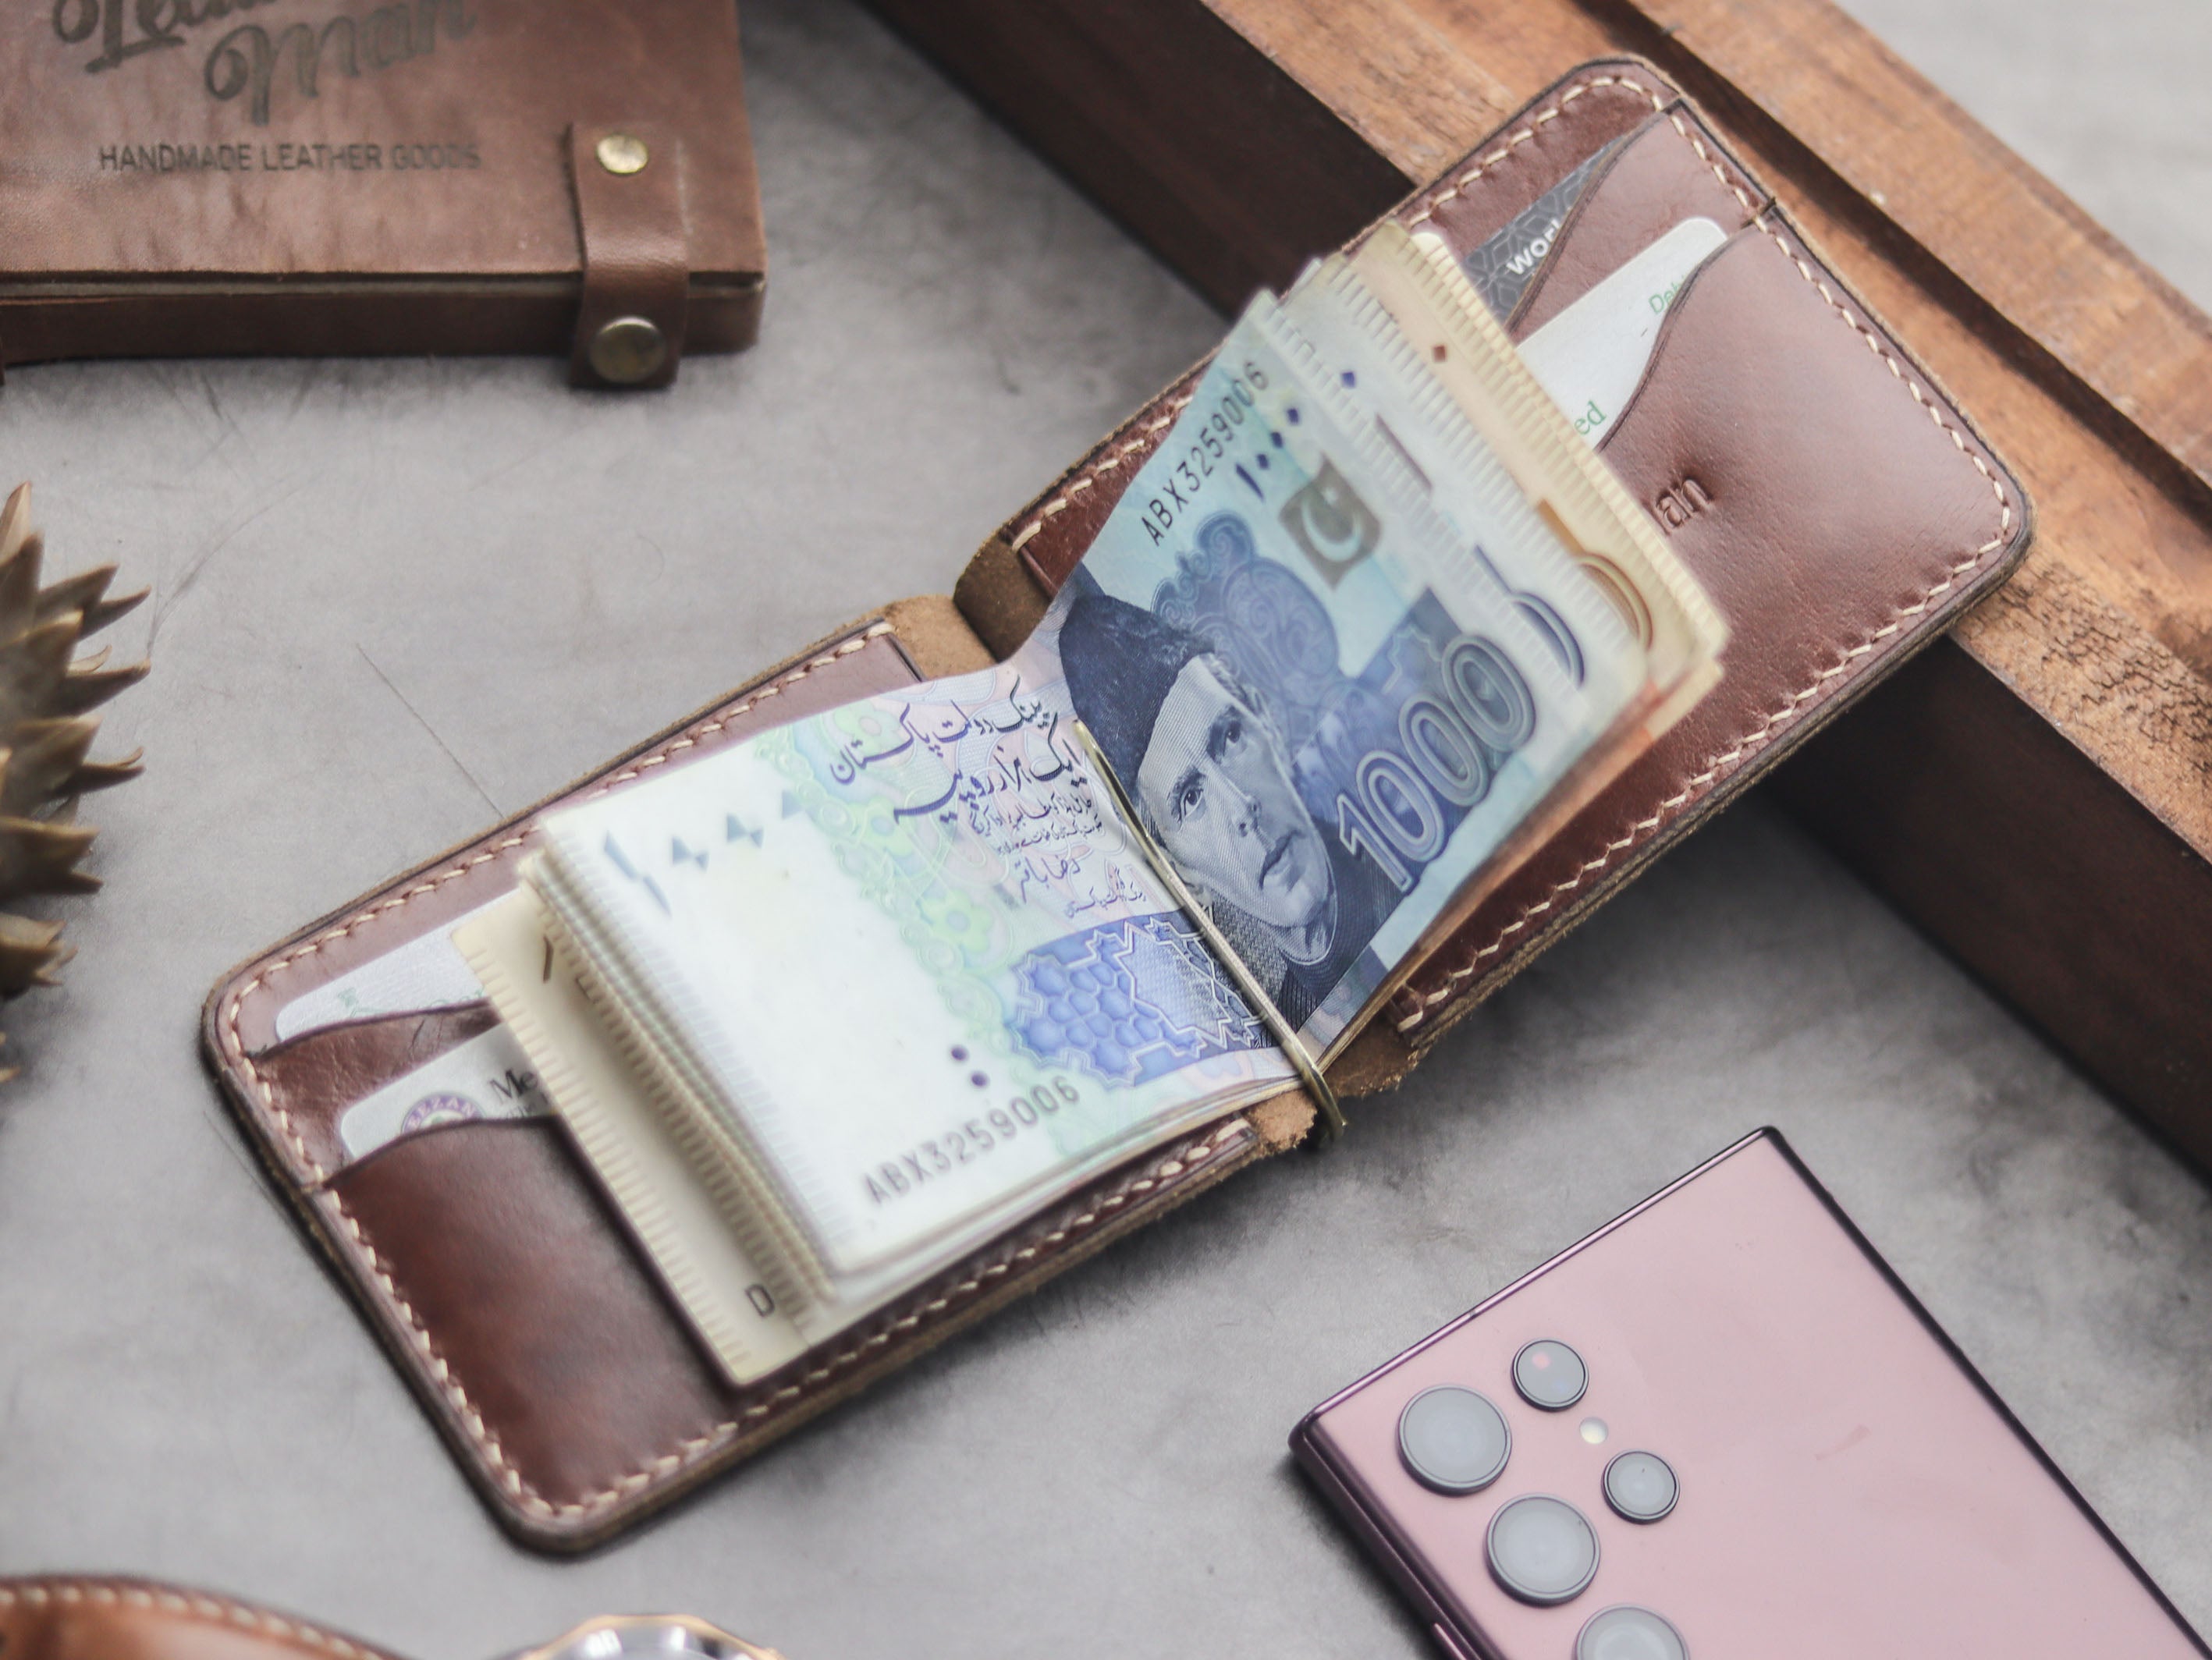 HASPER - CLIPPER WALLET WHISKY BROWN LEATHER